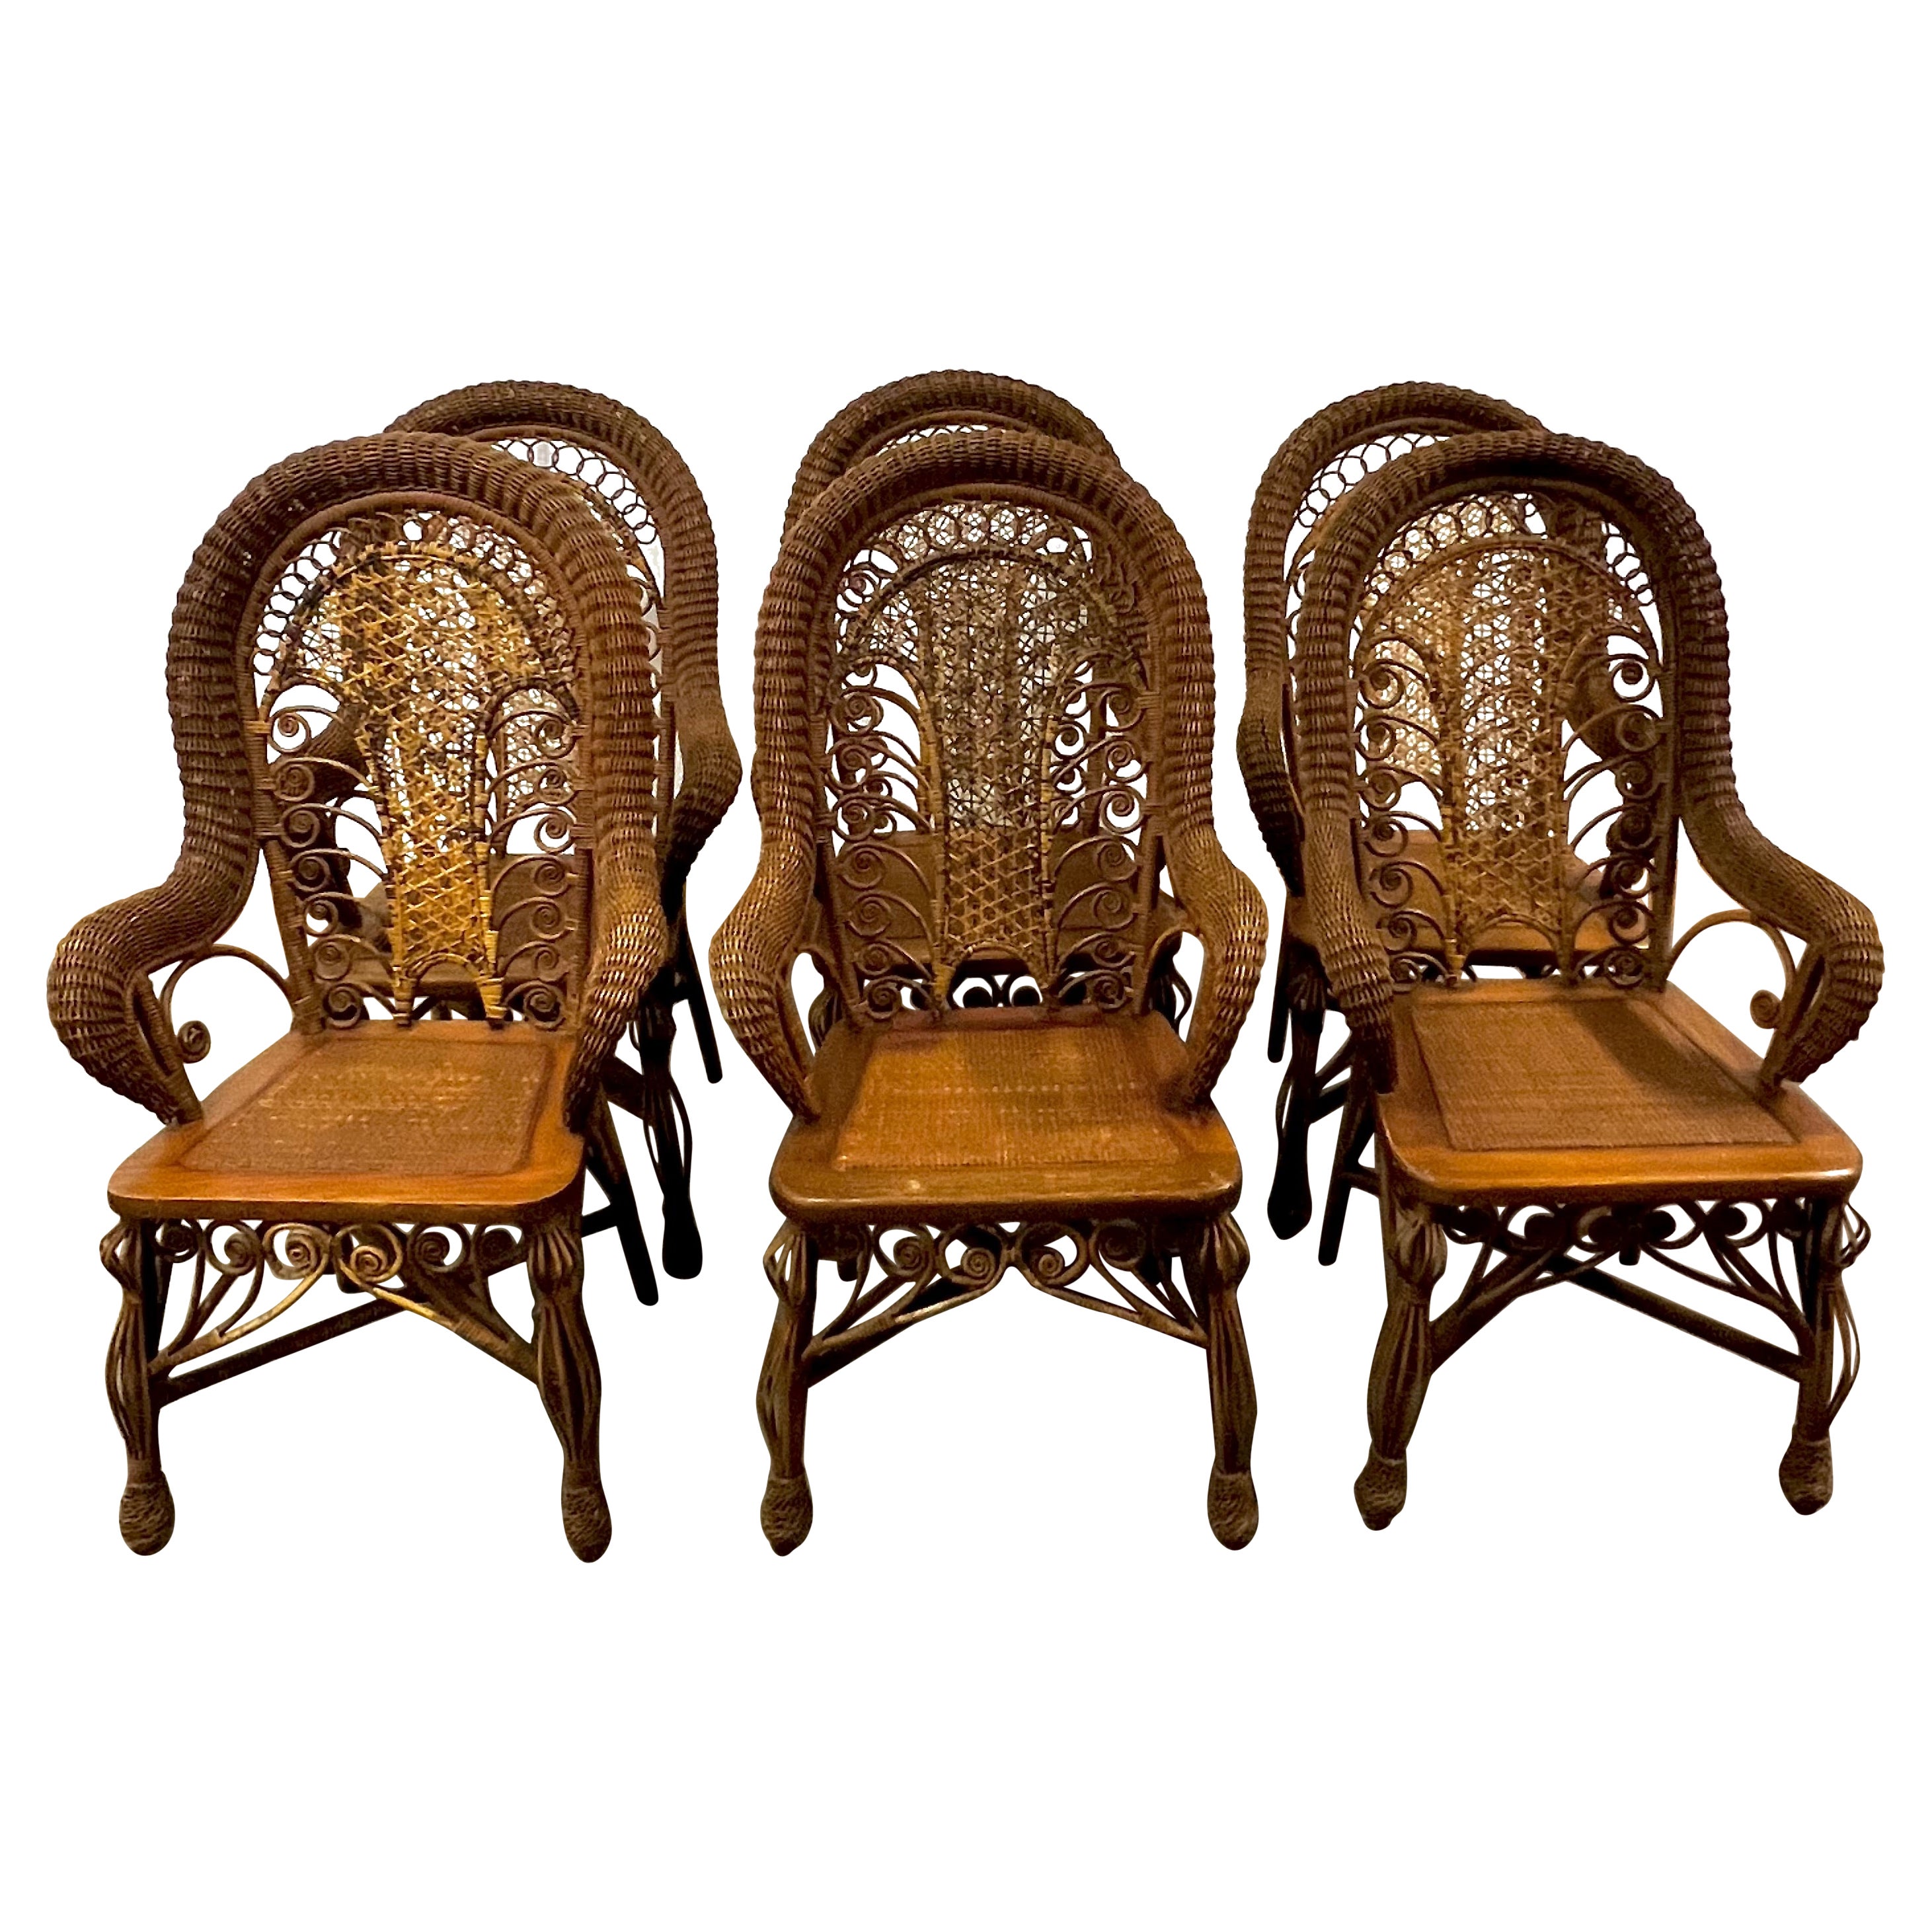 6 Wicker Dining Room Chairs